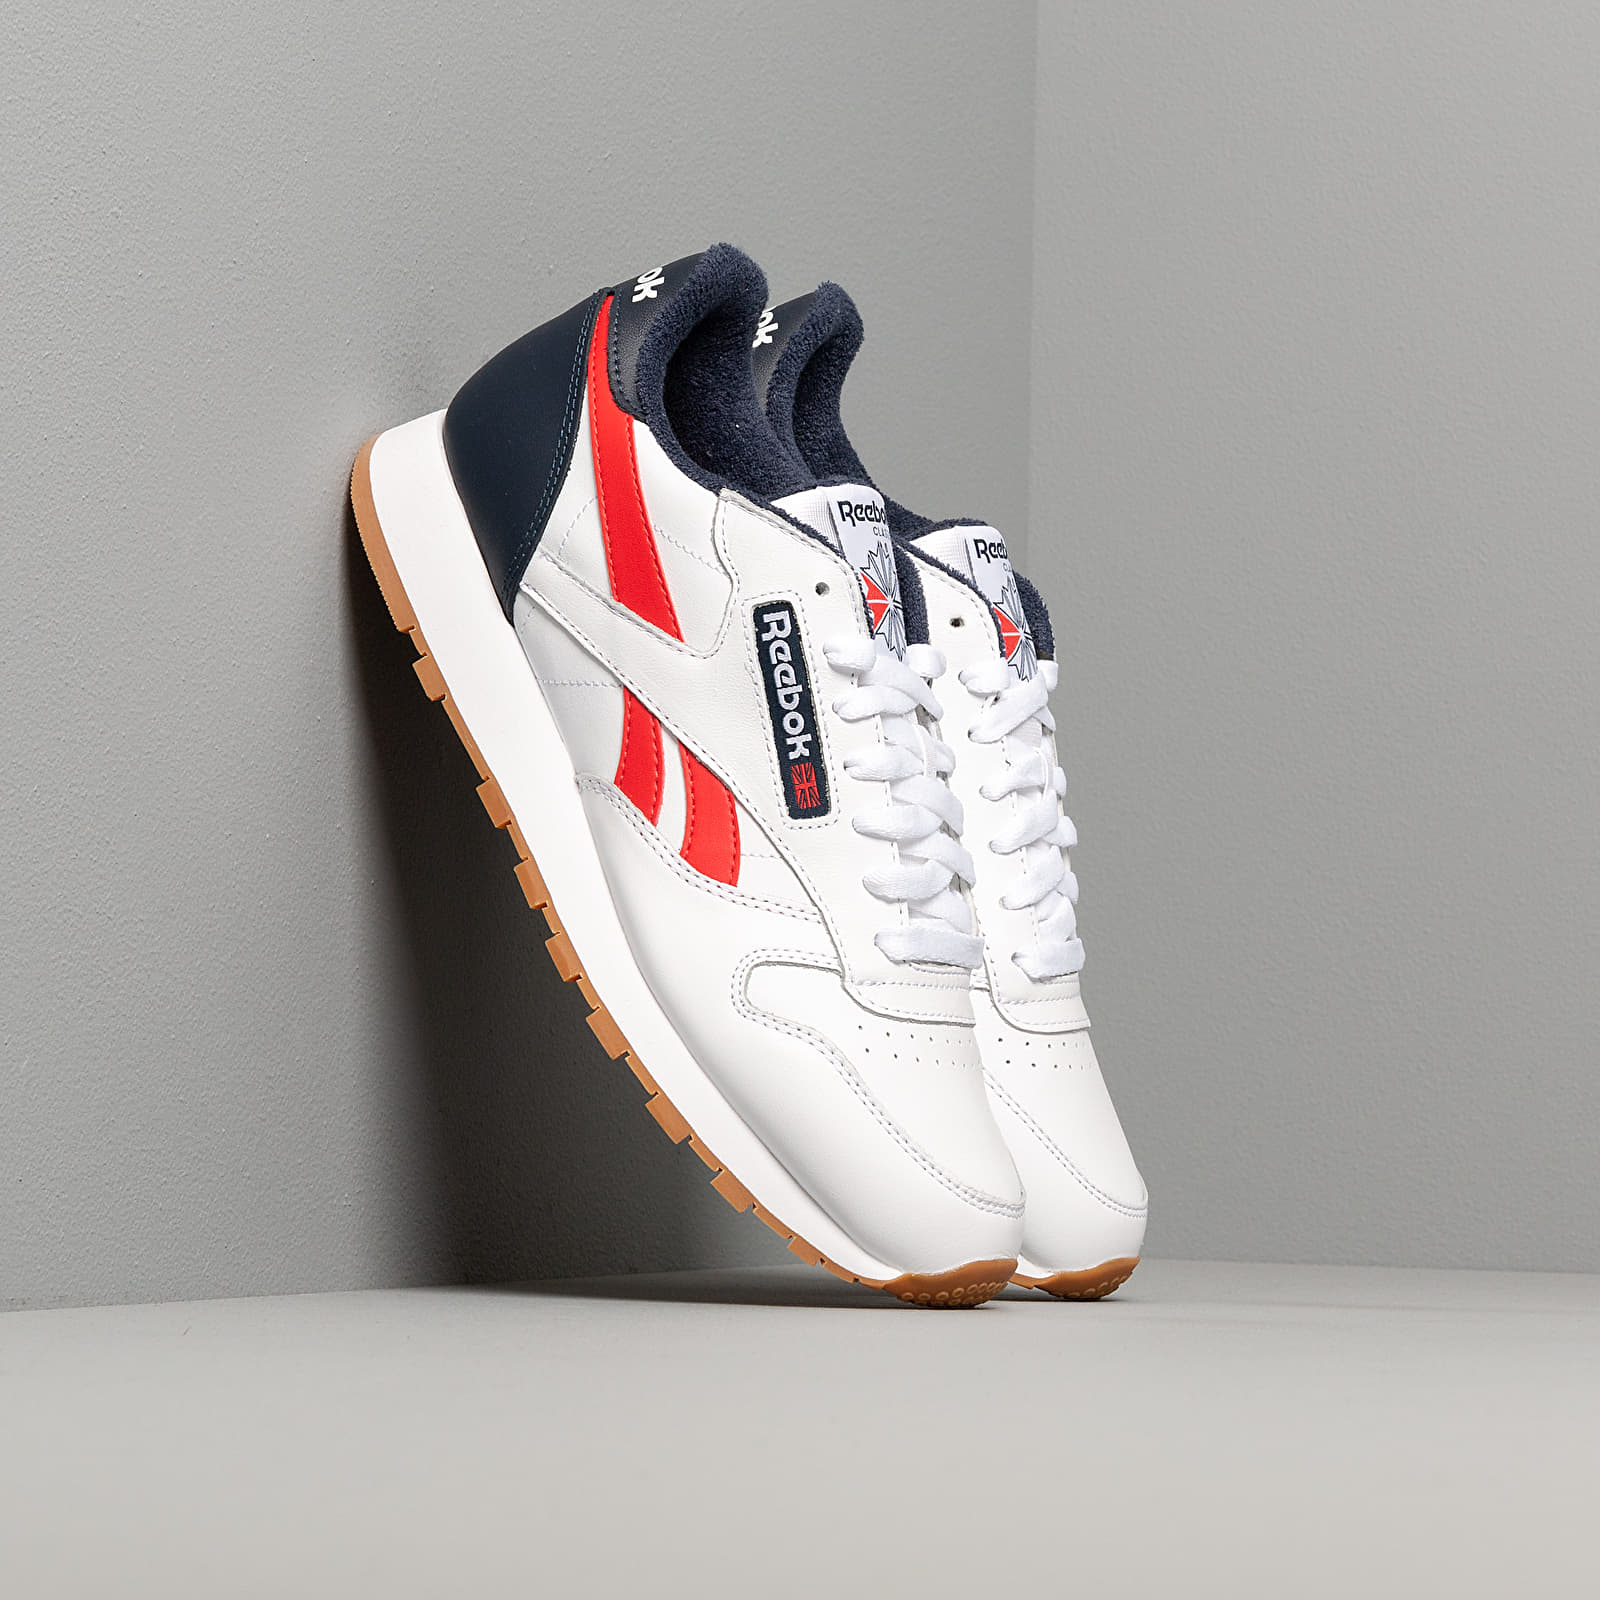 Chaussures et baskets homme Reebok Classic Leather MU White/ Collegiate Navy/ Radiant Red